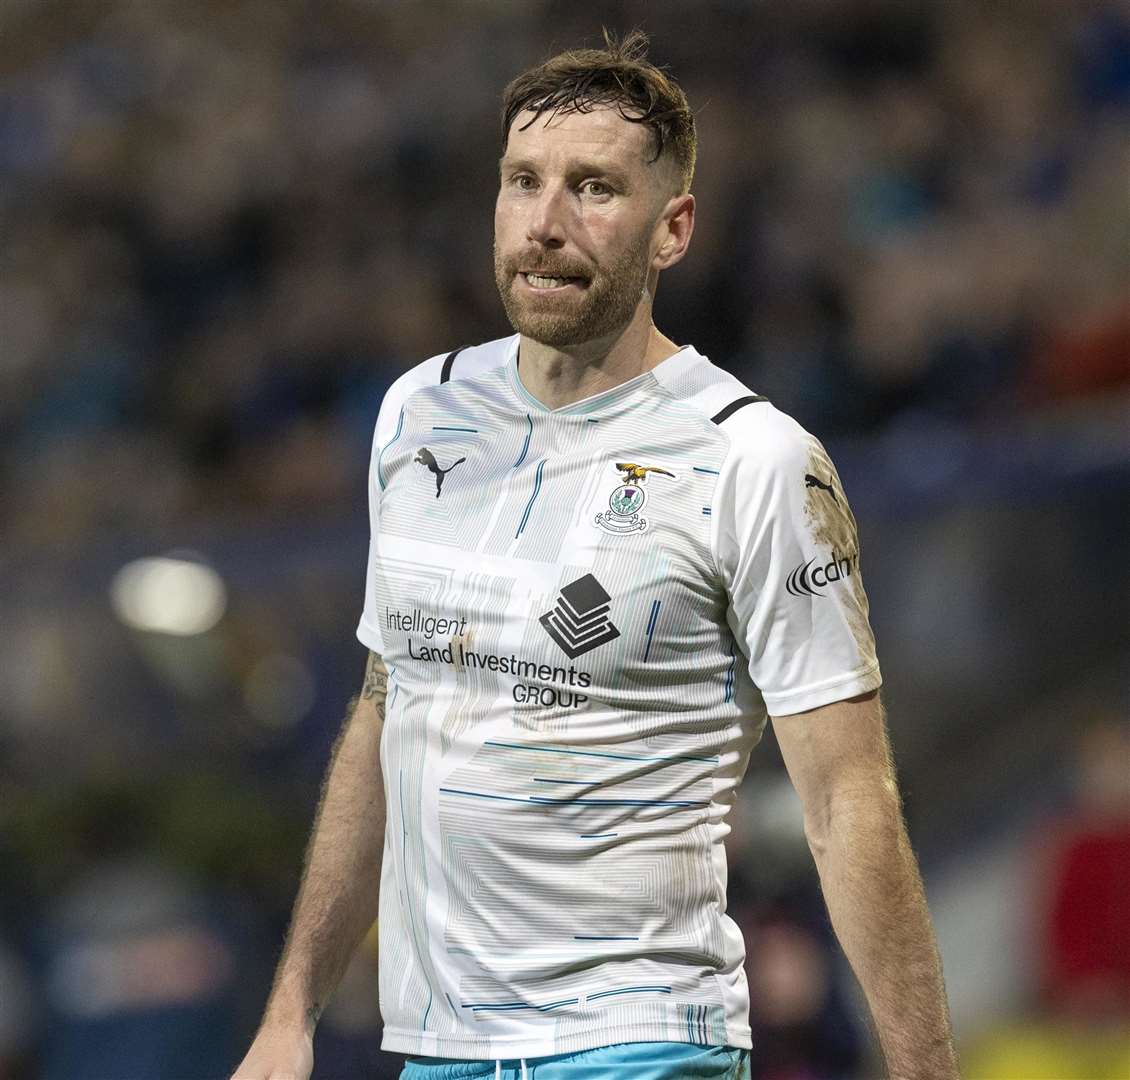 Ex-Caley Thistle defender Kirk Broadfoot knew how to fire up the team.